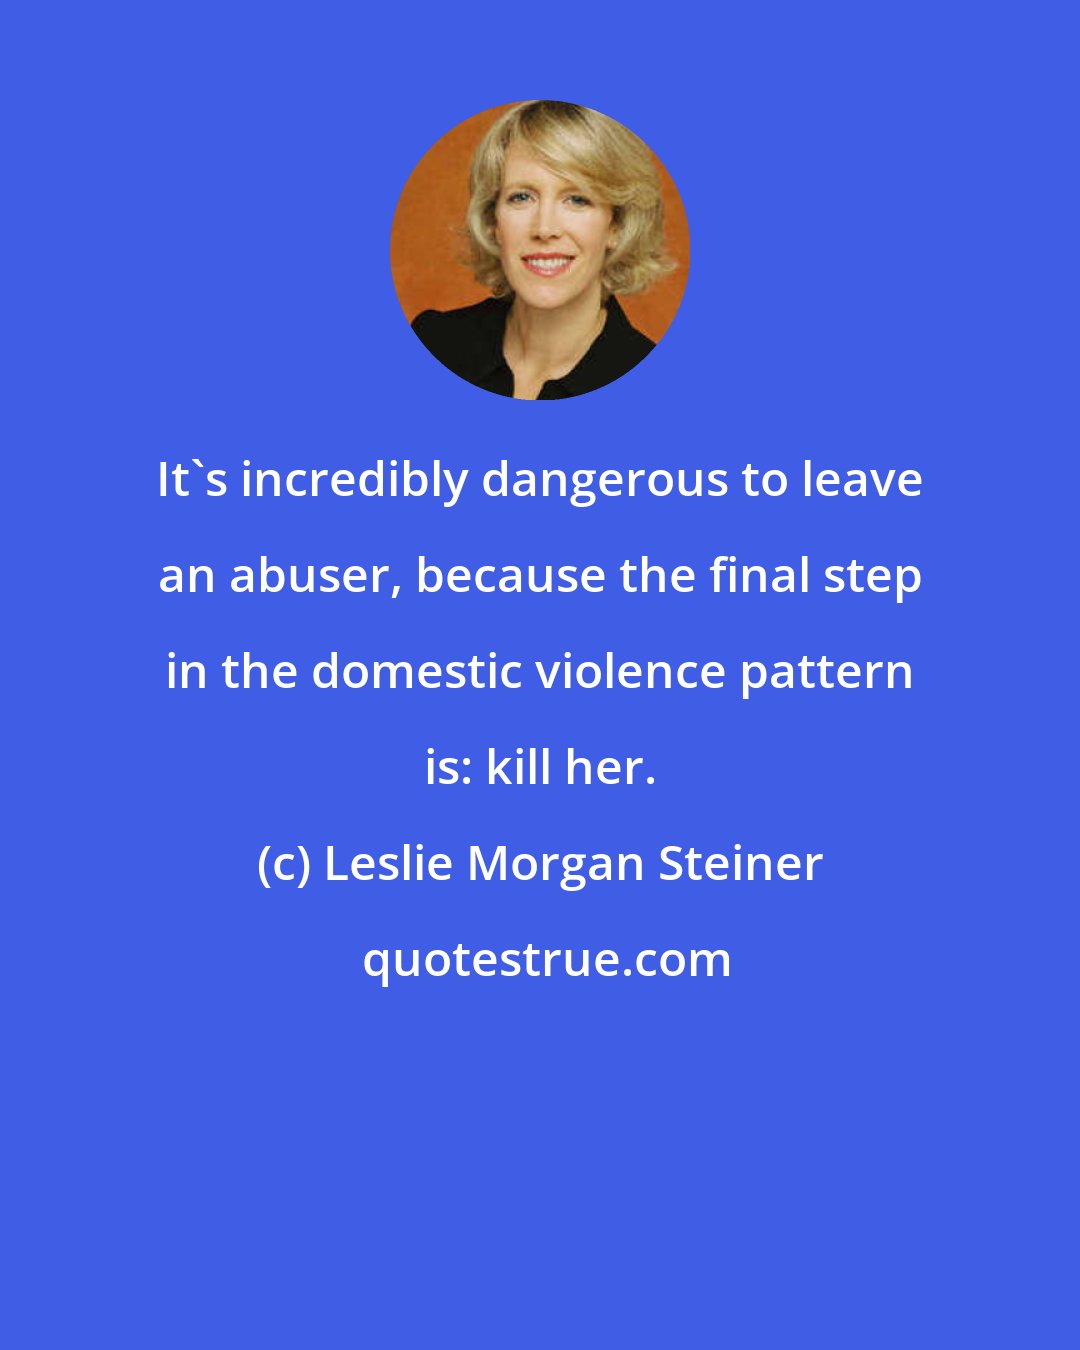 Leslie Morgan Steiner: It's incredibly dangerous to leave an abuser, because the final step in the domestic violence pattern is: kill her.